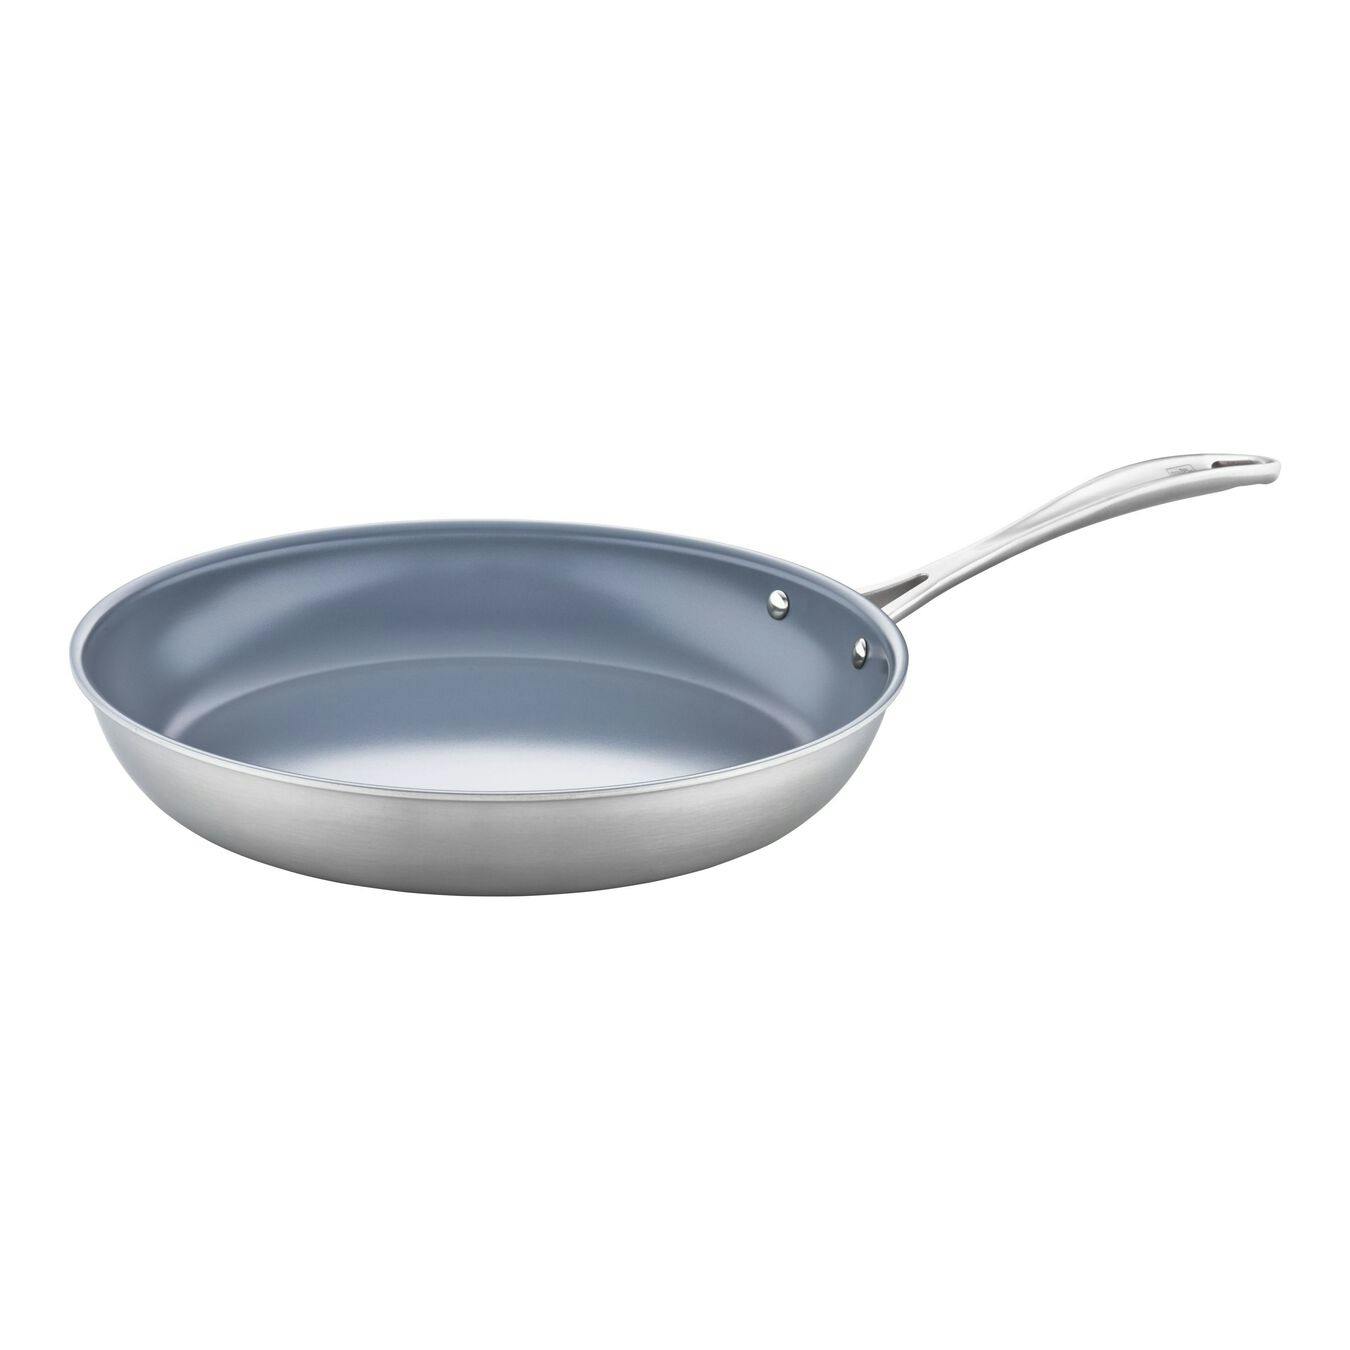 Zwilling Spirit 3-Ply 10-Inch Stainless Steel Fry Pan